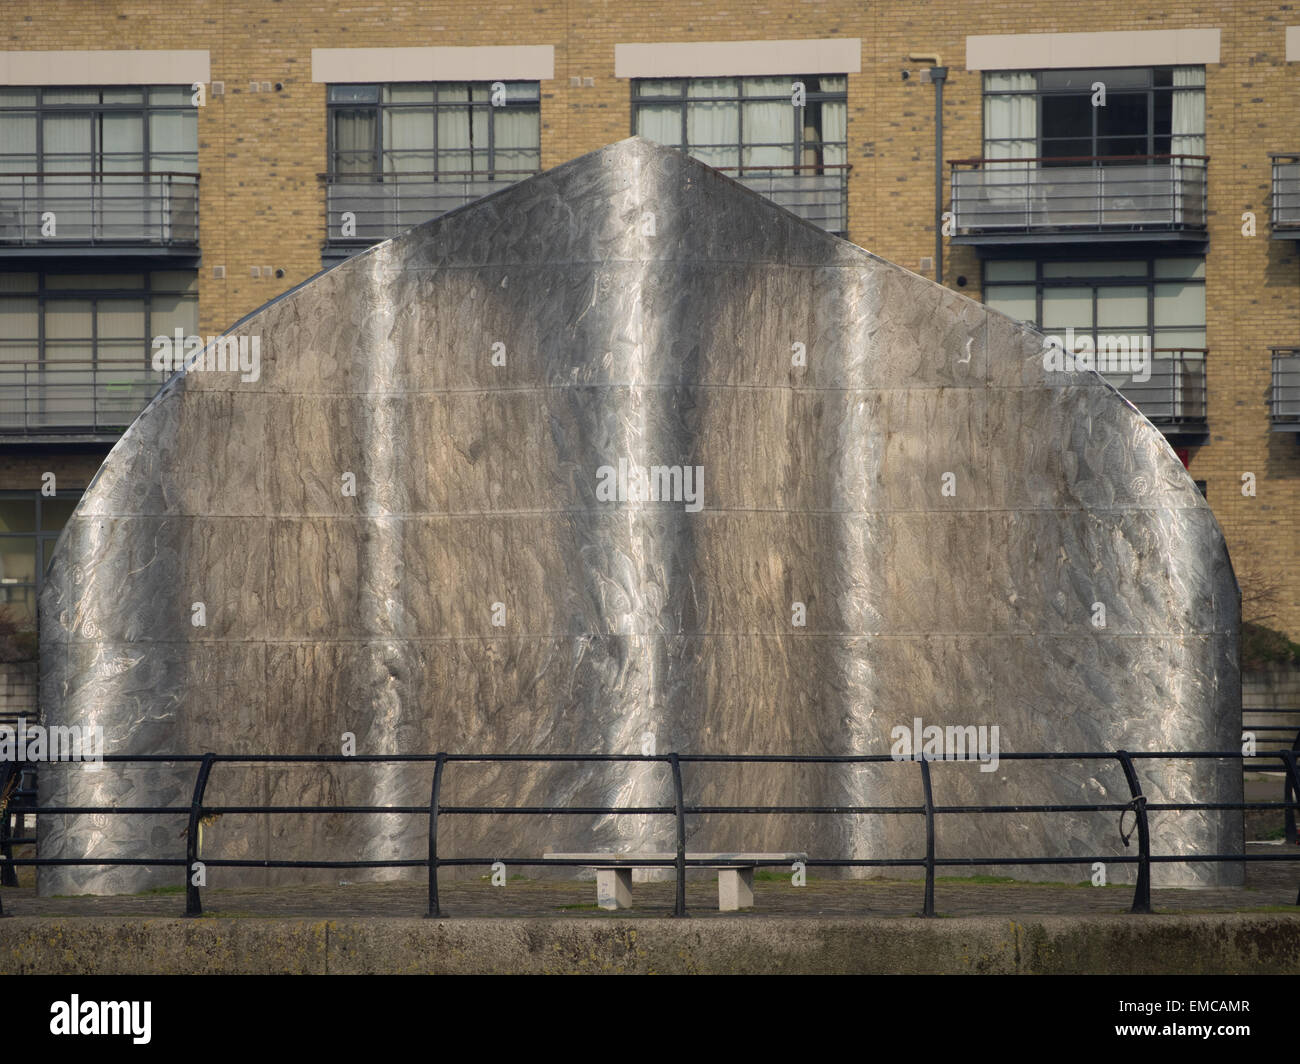 Liquidity by Simon Packard,stainless steel sculpture at Brentford Dock Marina on the River Thames, with railings in front,2002 Stock Photo